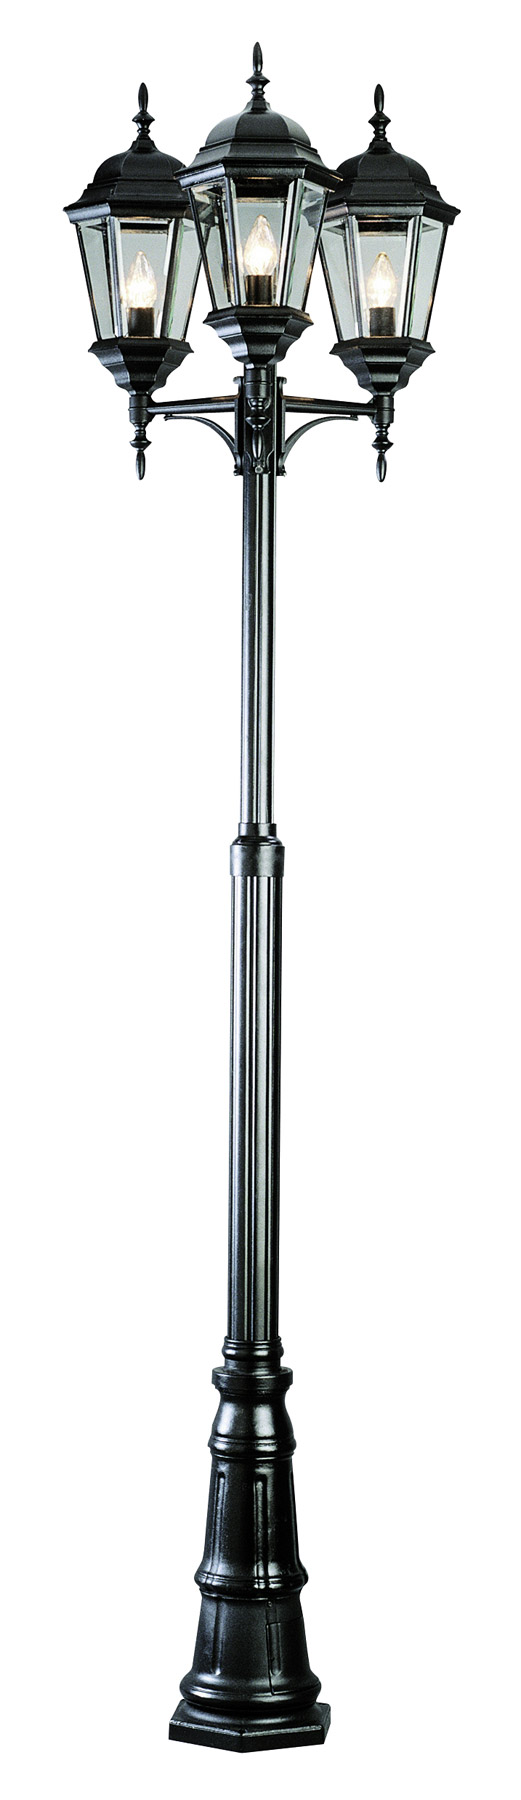 outdoor pole lamps photo - 6